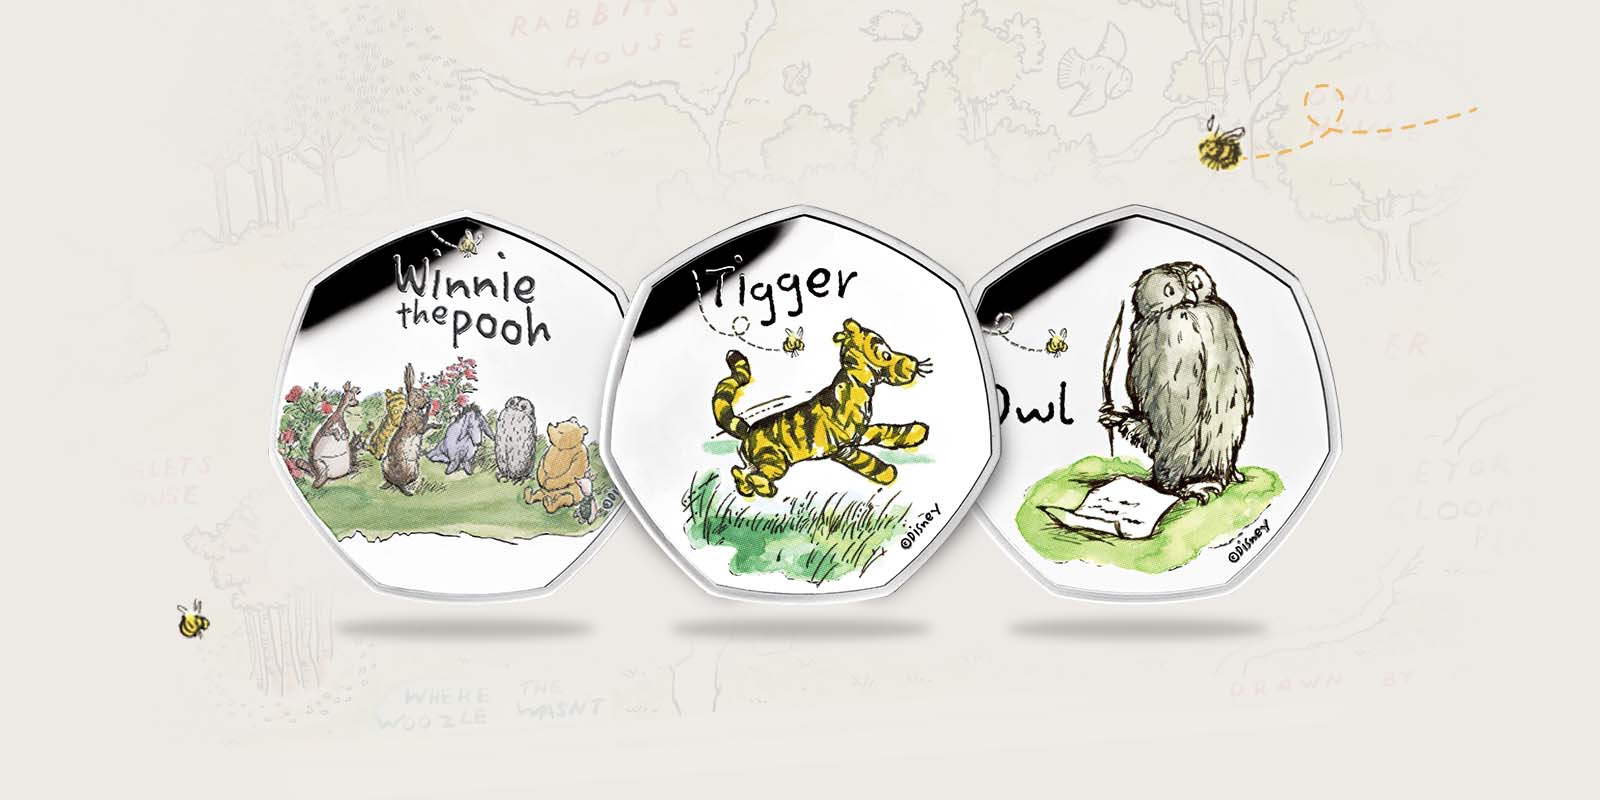 Winnie the Pooh and Friends, Tigger & Owl